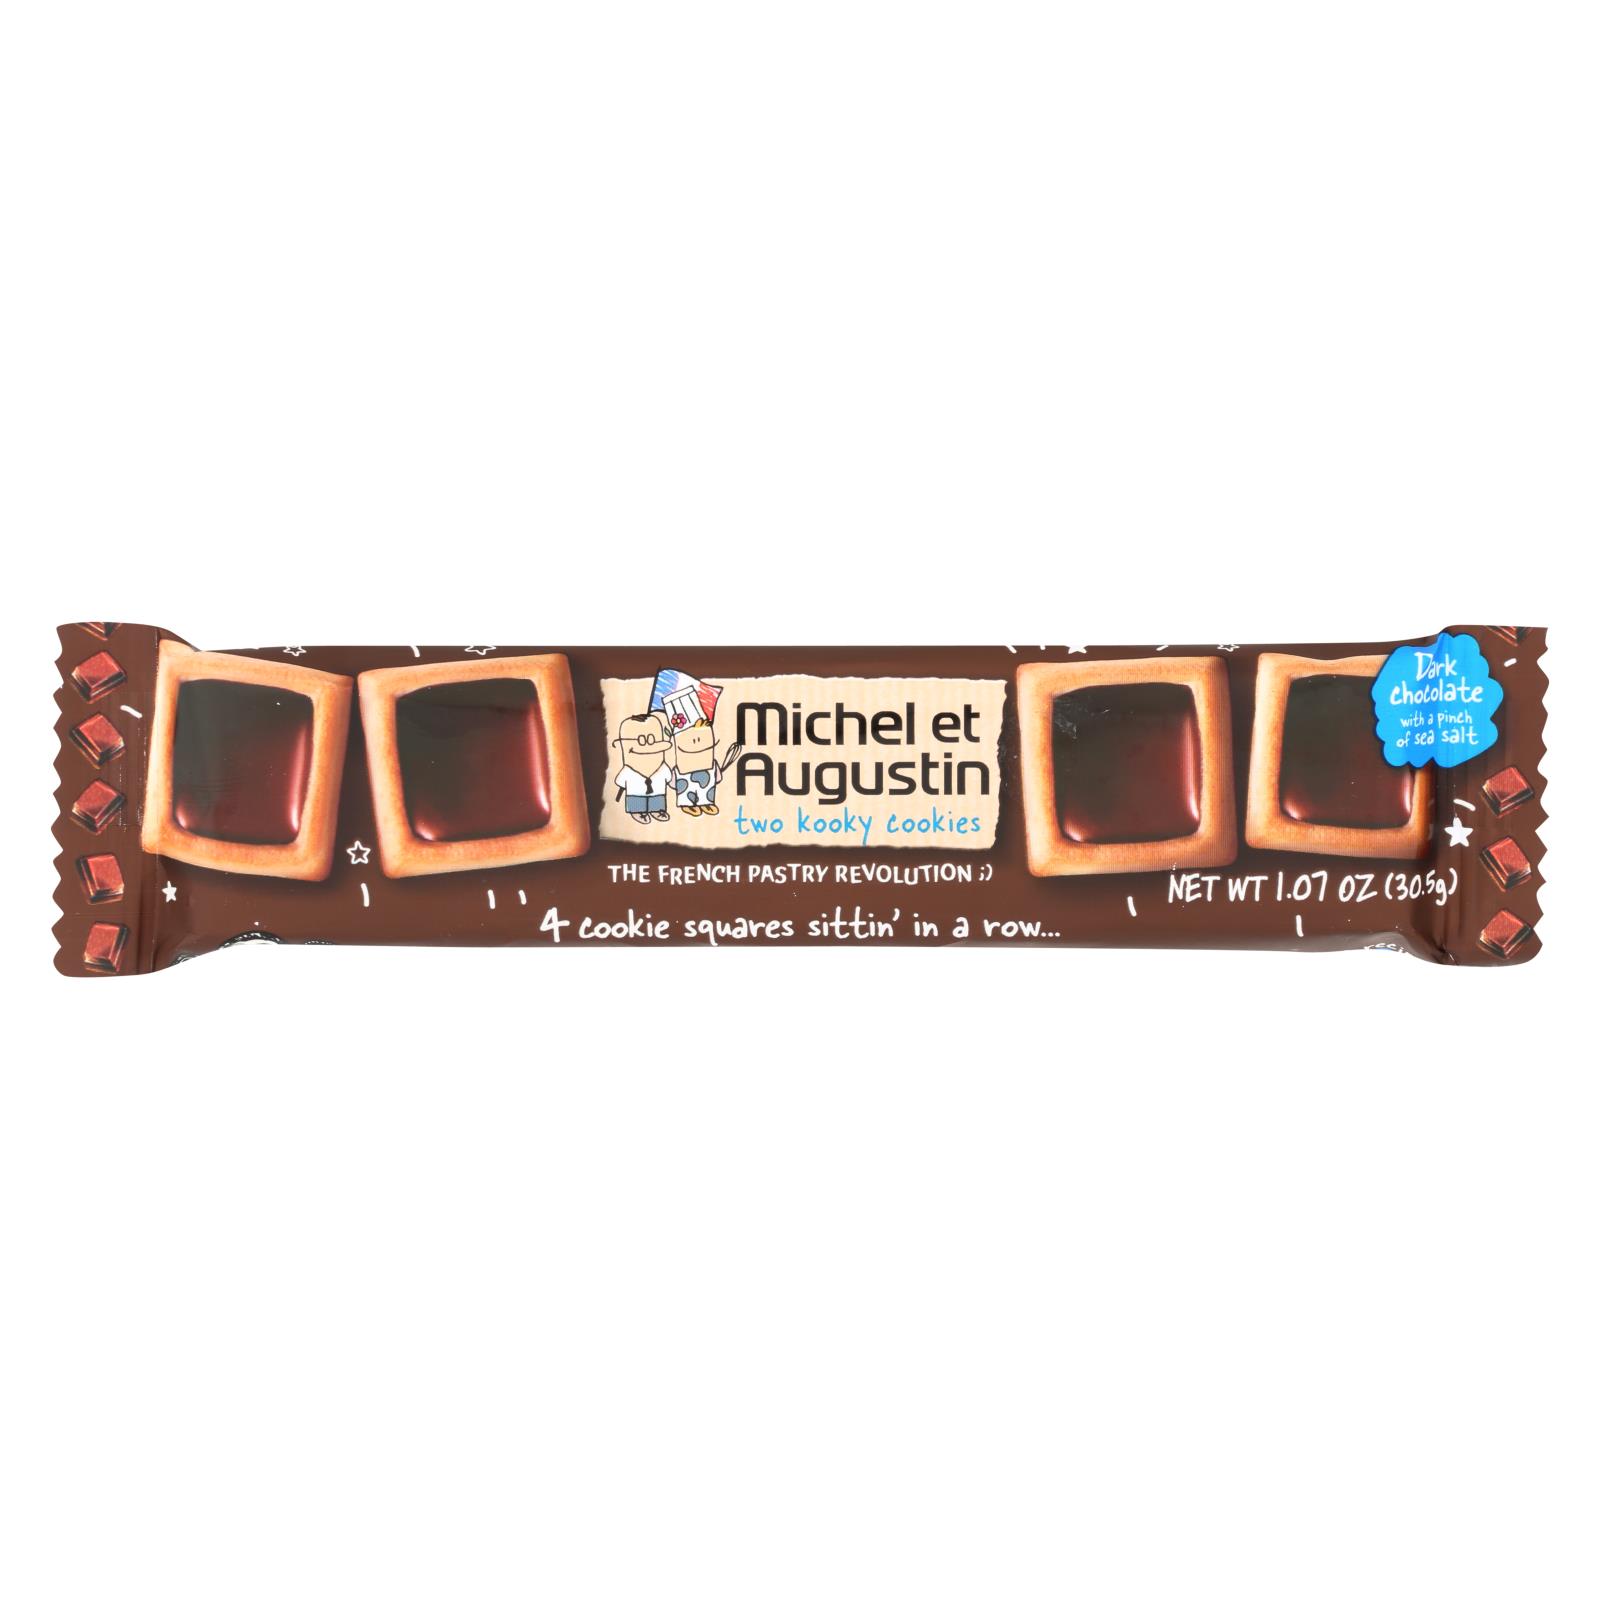 Michel Et Augustin Cookie Squares With Dark Chocolate - 18개 묶음상품 - 1.07 OZ